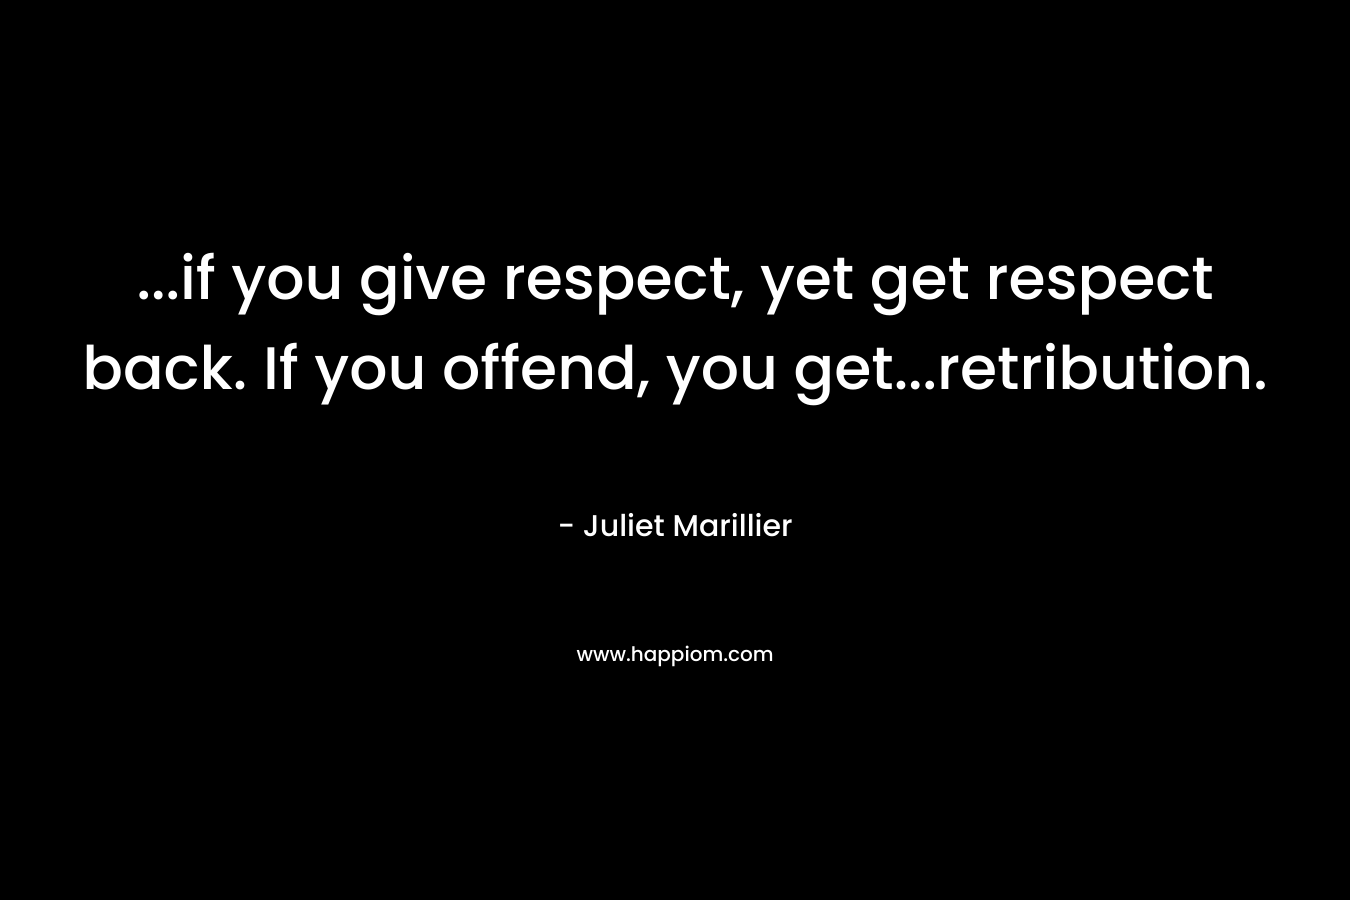 ...if you give respect, yet get respect back. If you offend, you get...retribution.